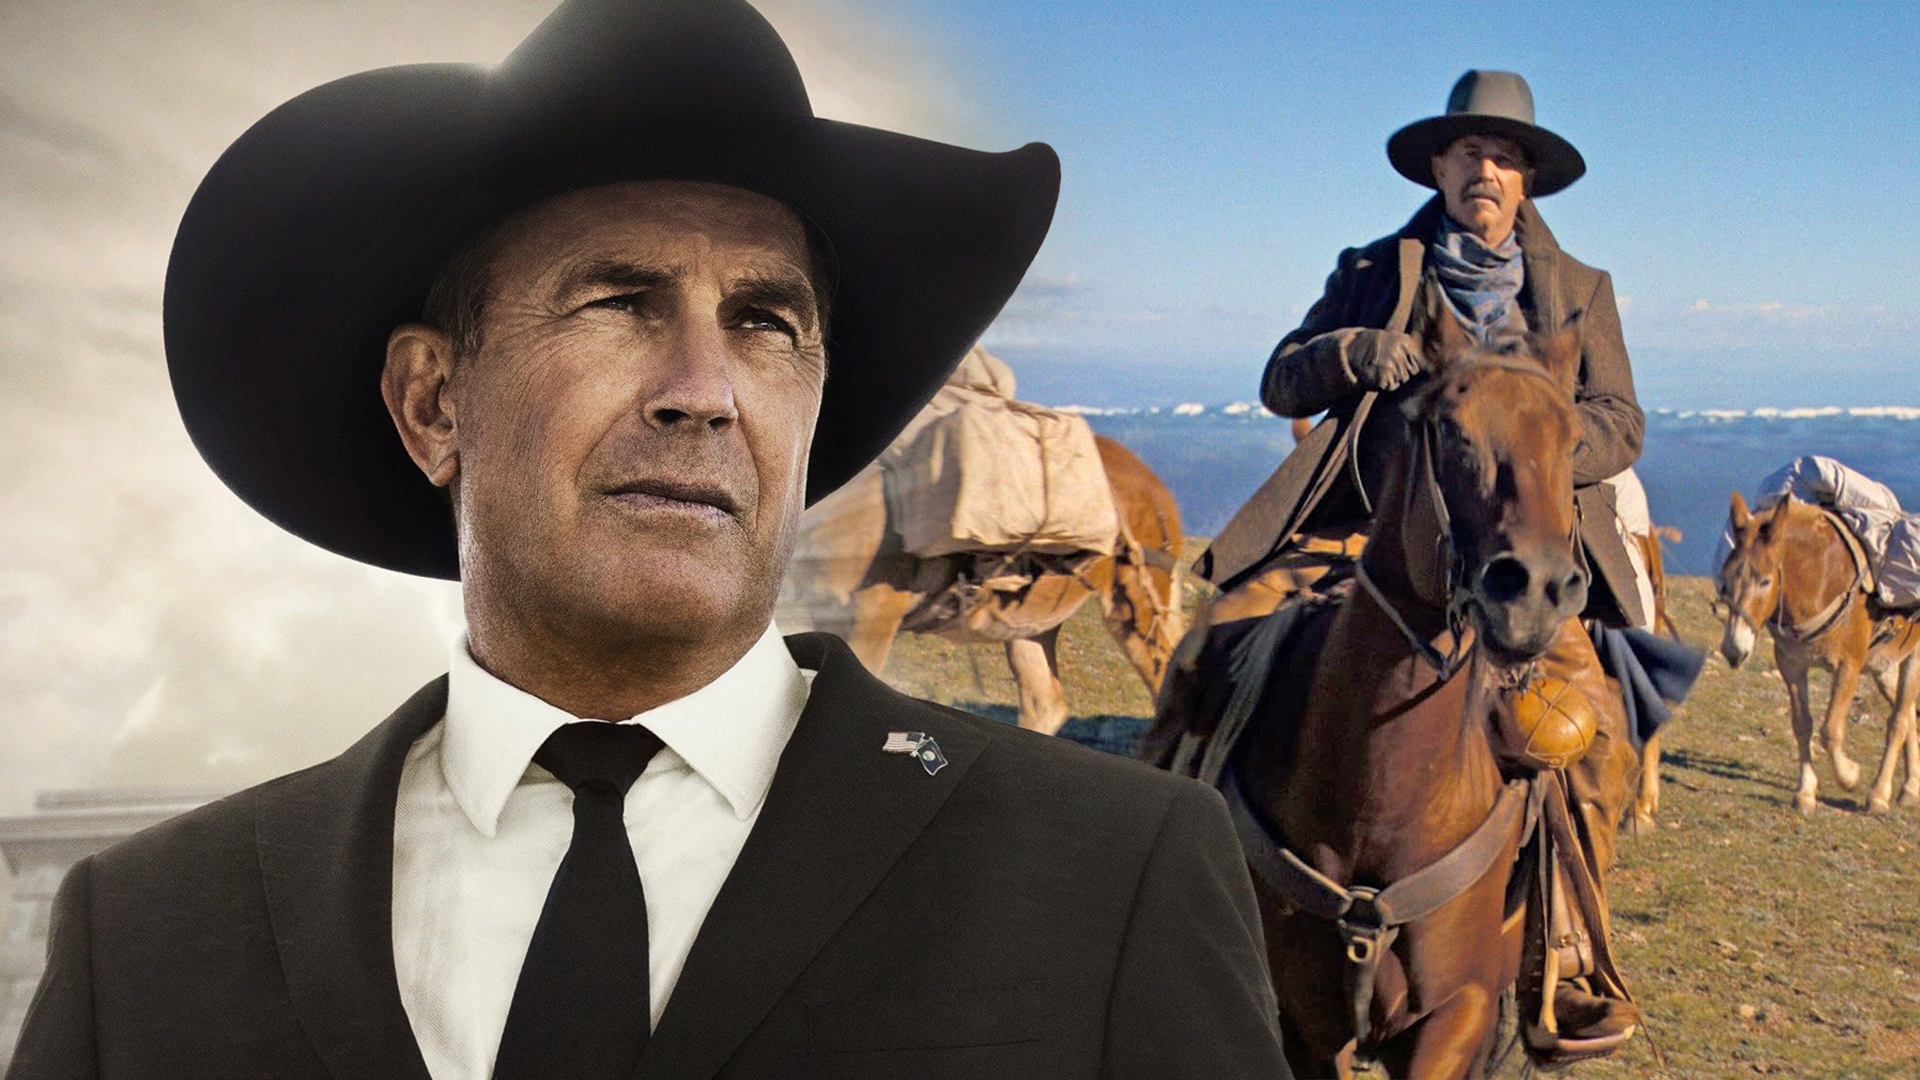 Kevin Costner Wins Big at Golden Globes: How Yellowstone Star's Victory Sparked Hilarious Cheers from Better Call Saul